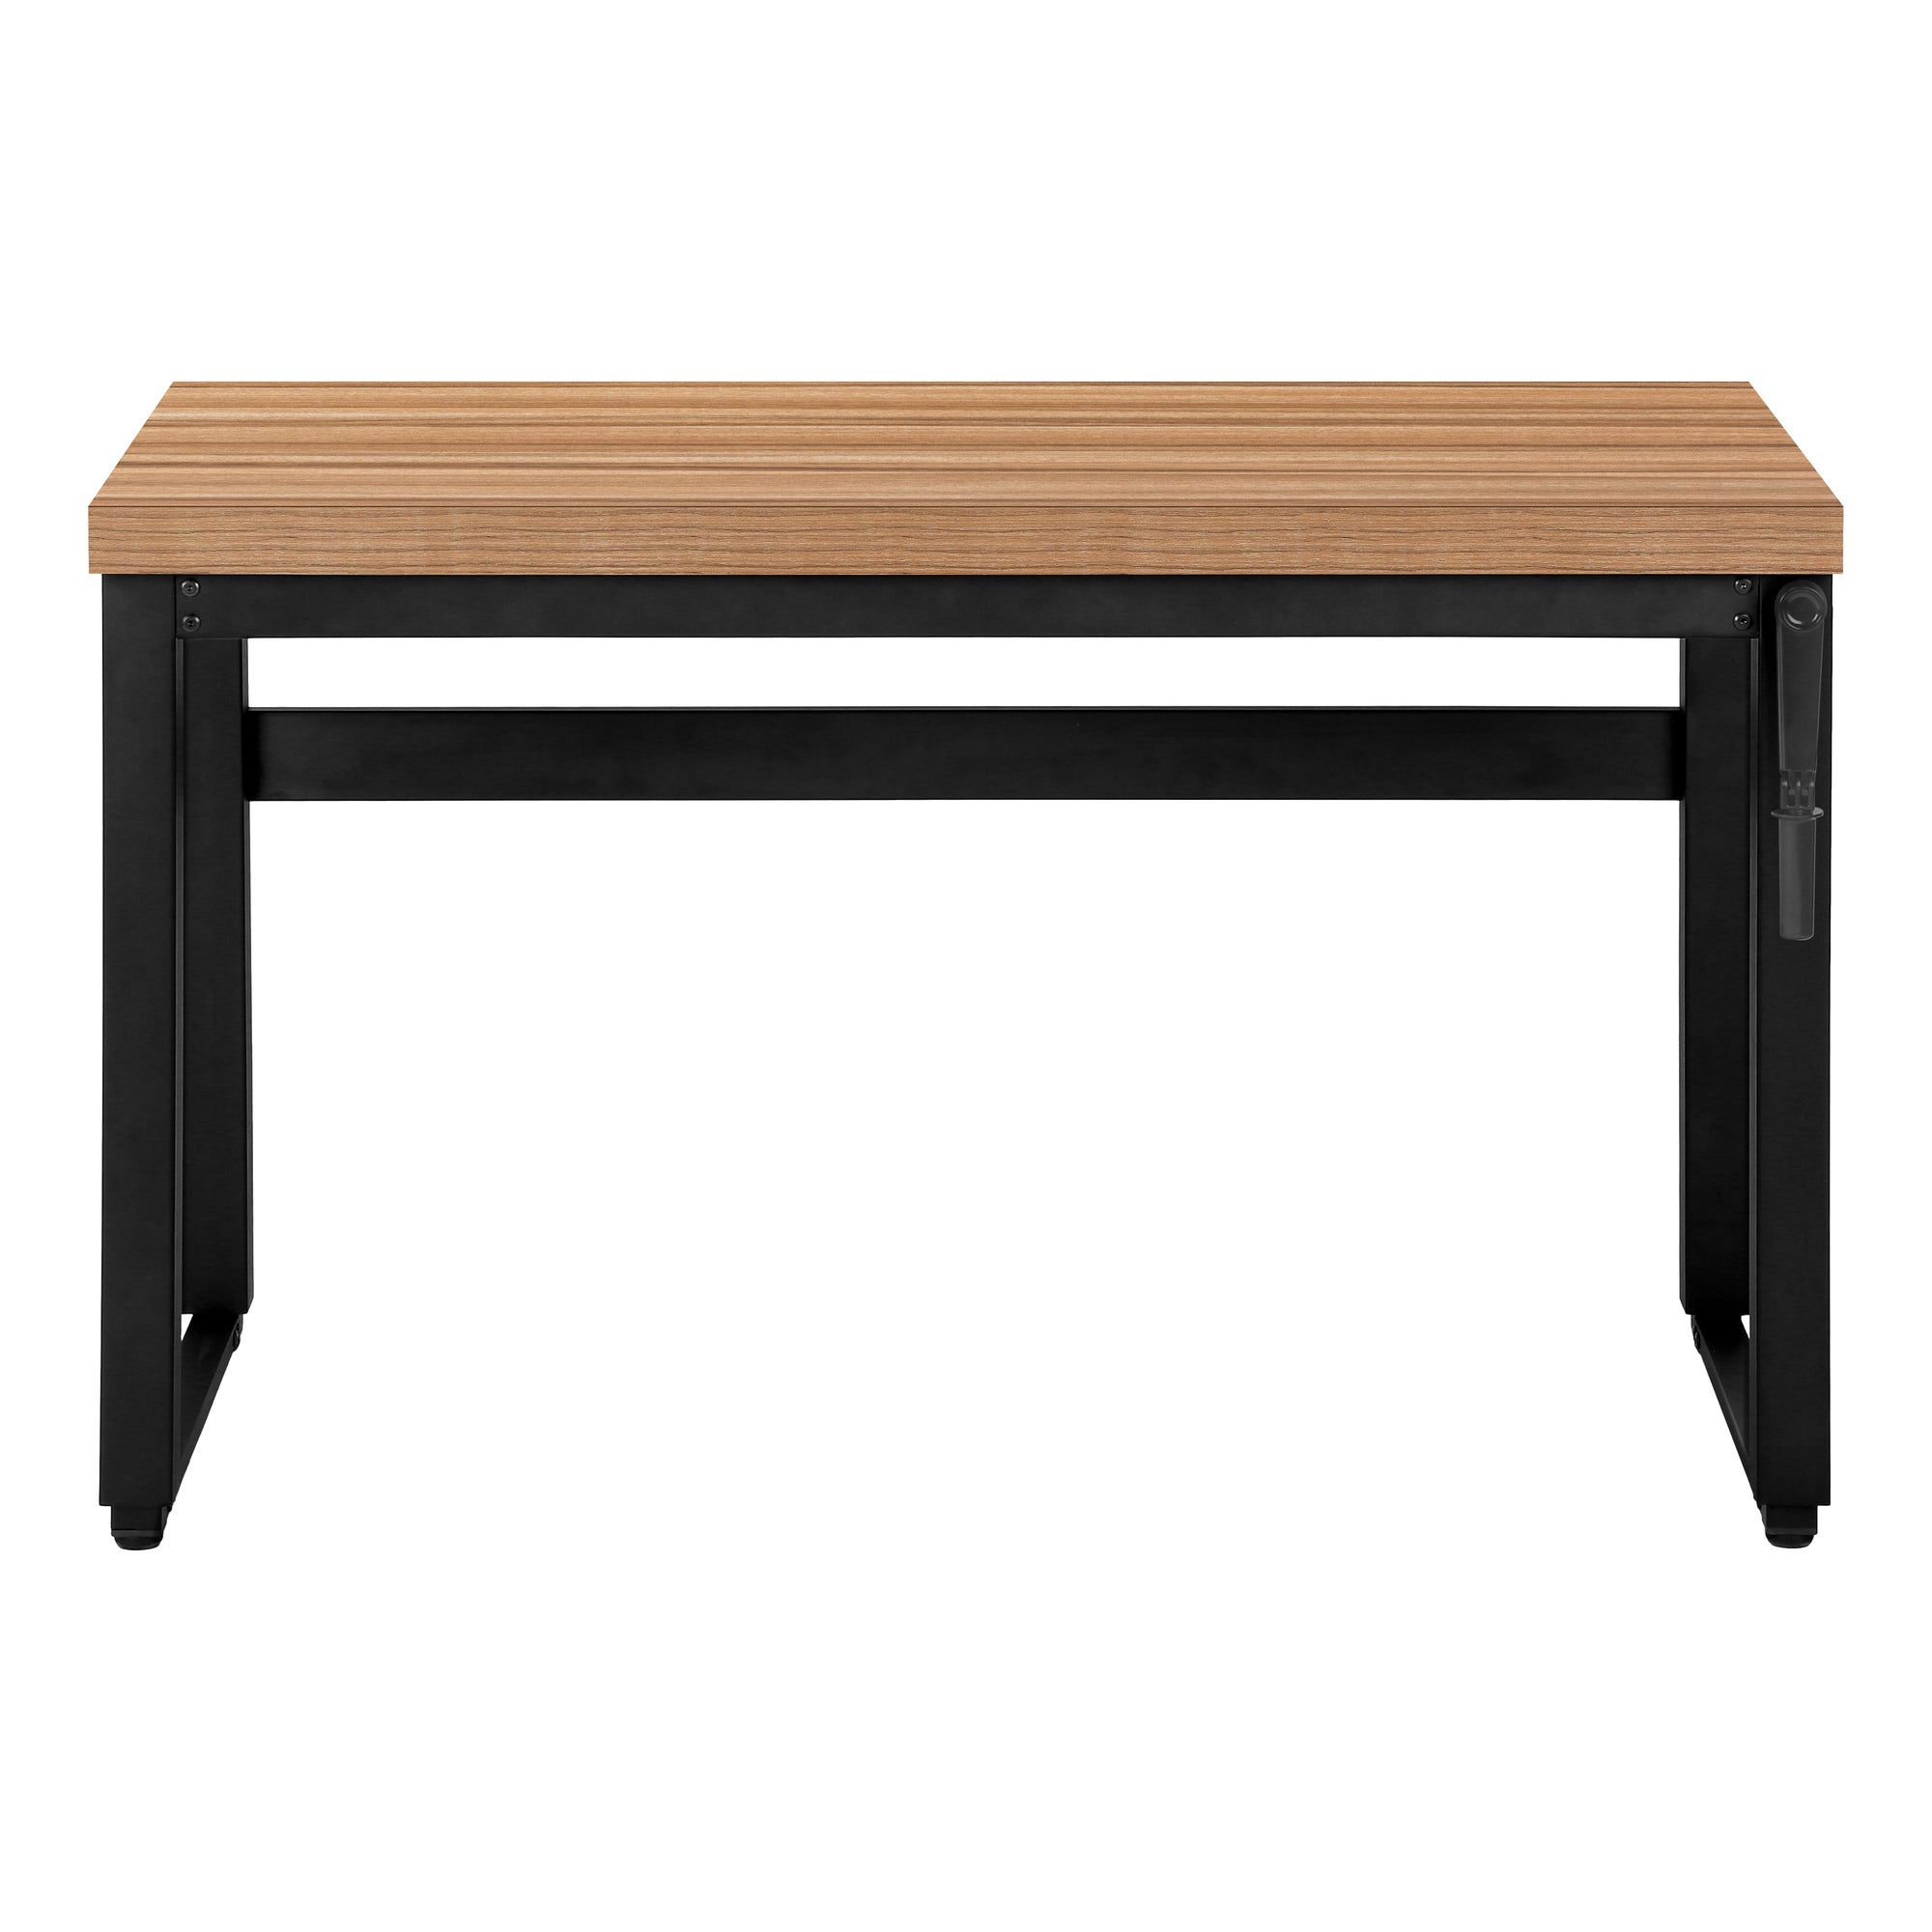 MN-717677    Computer Desk, Home Office, Standing, Adjustable, 48"L, Metal Legs, Laminate, Reclaimed Wood, Contemporary, Modern